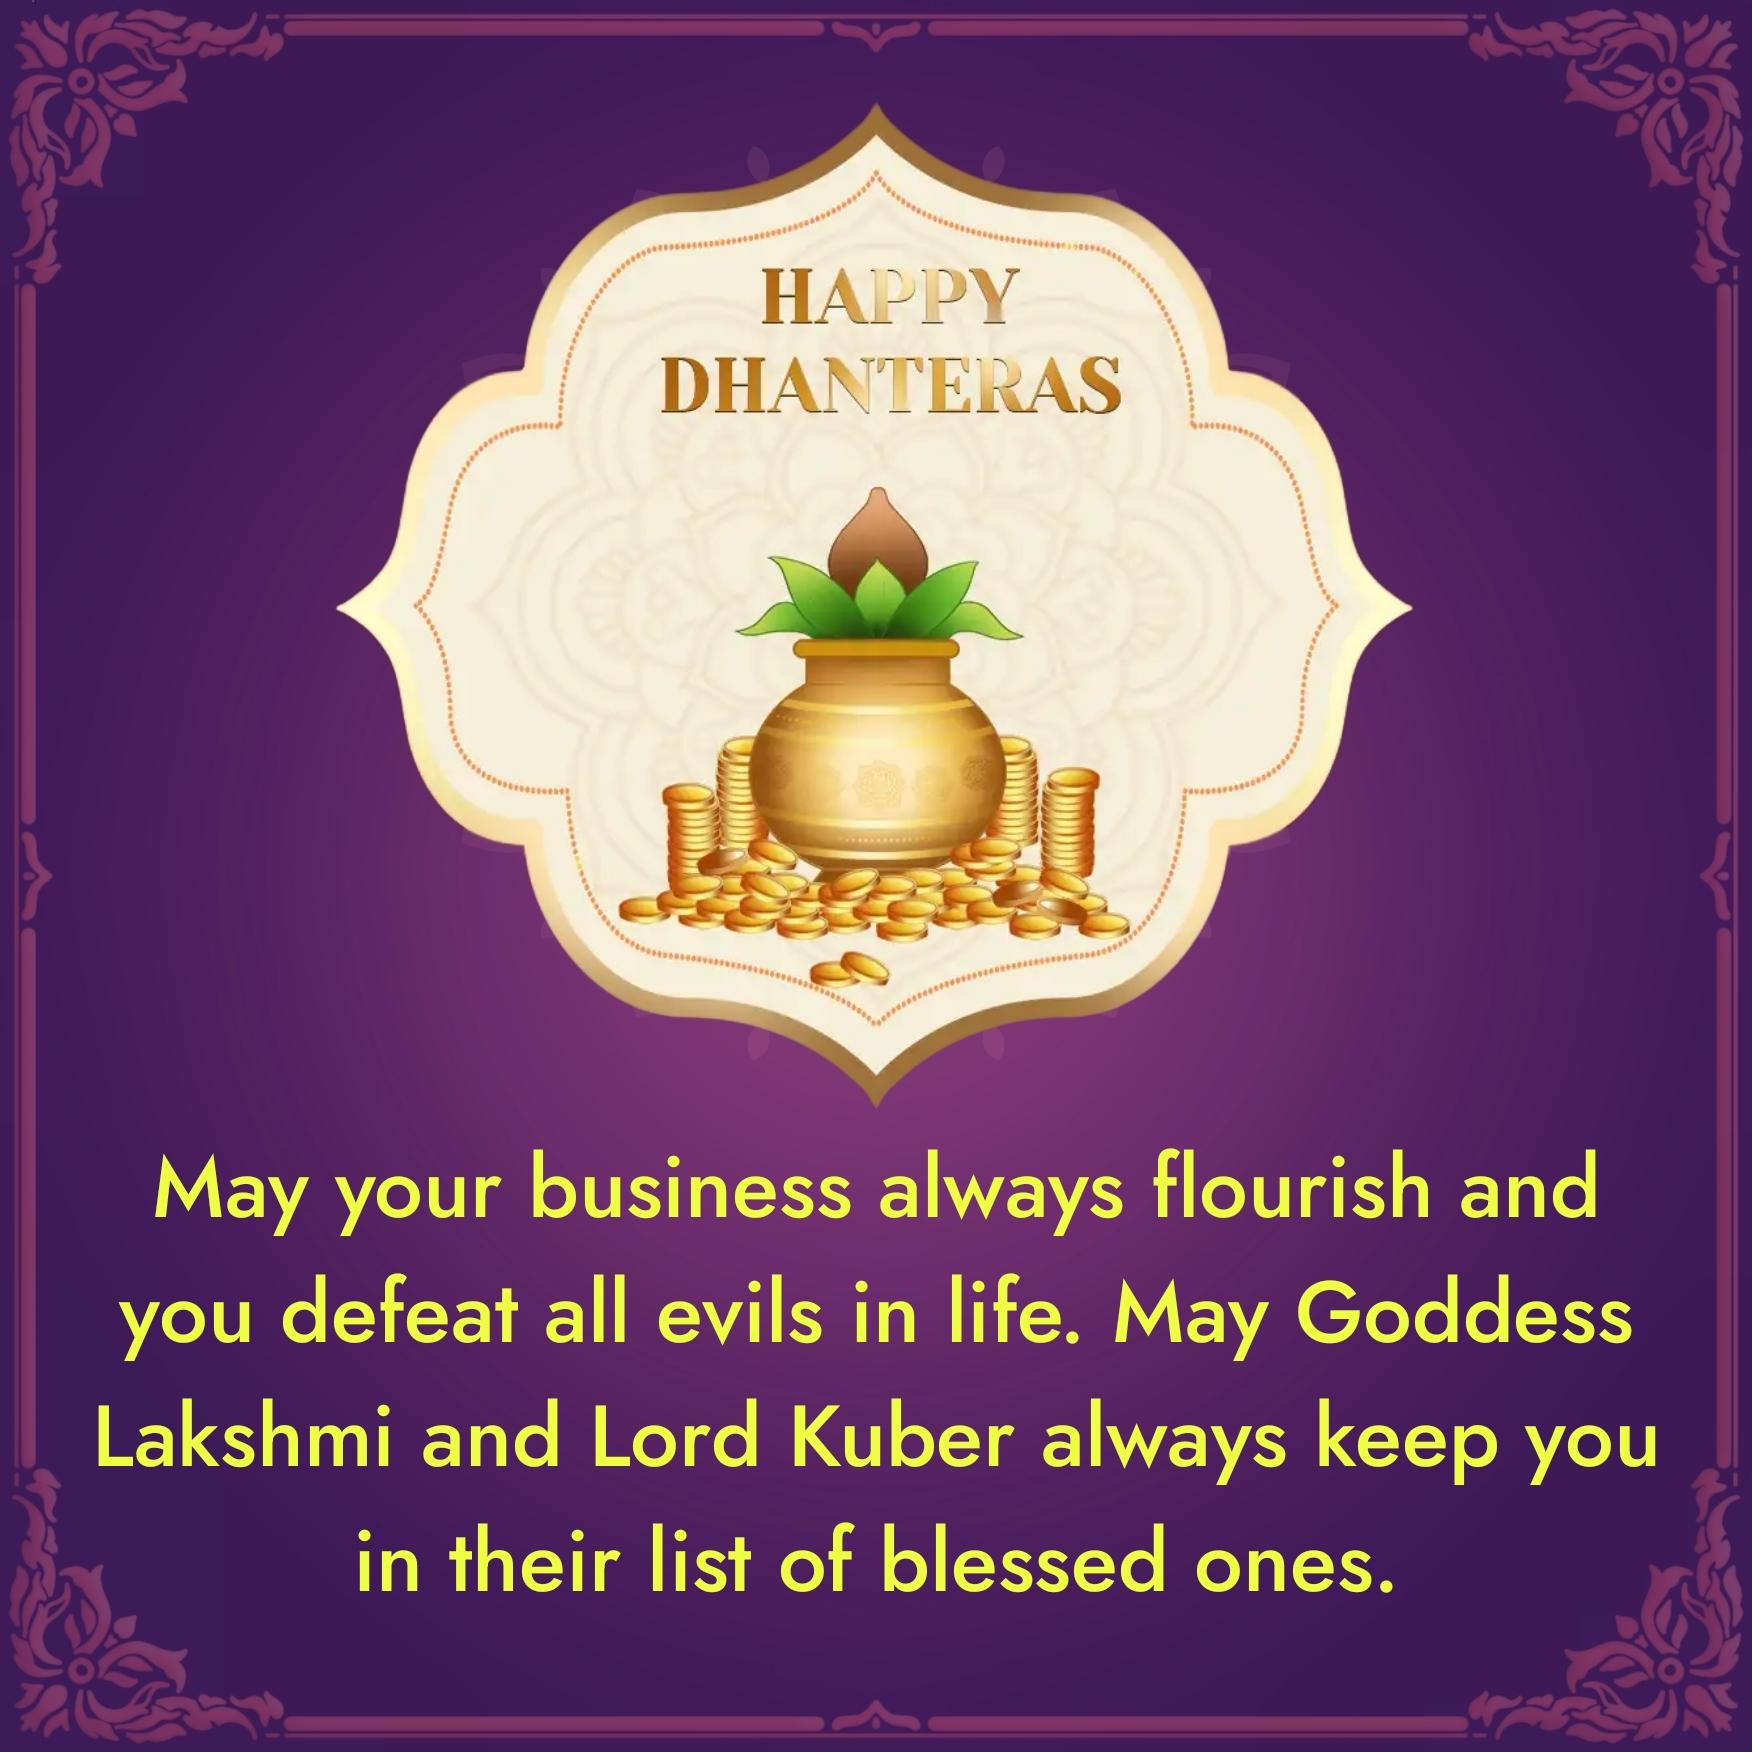 May your business always flourish and you defeat all evils